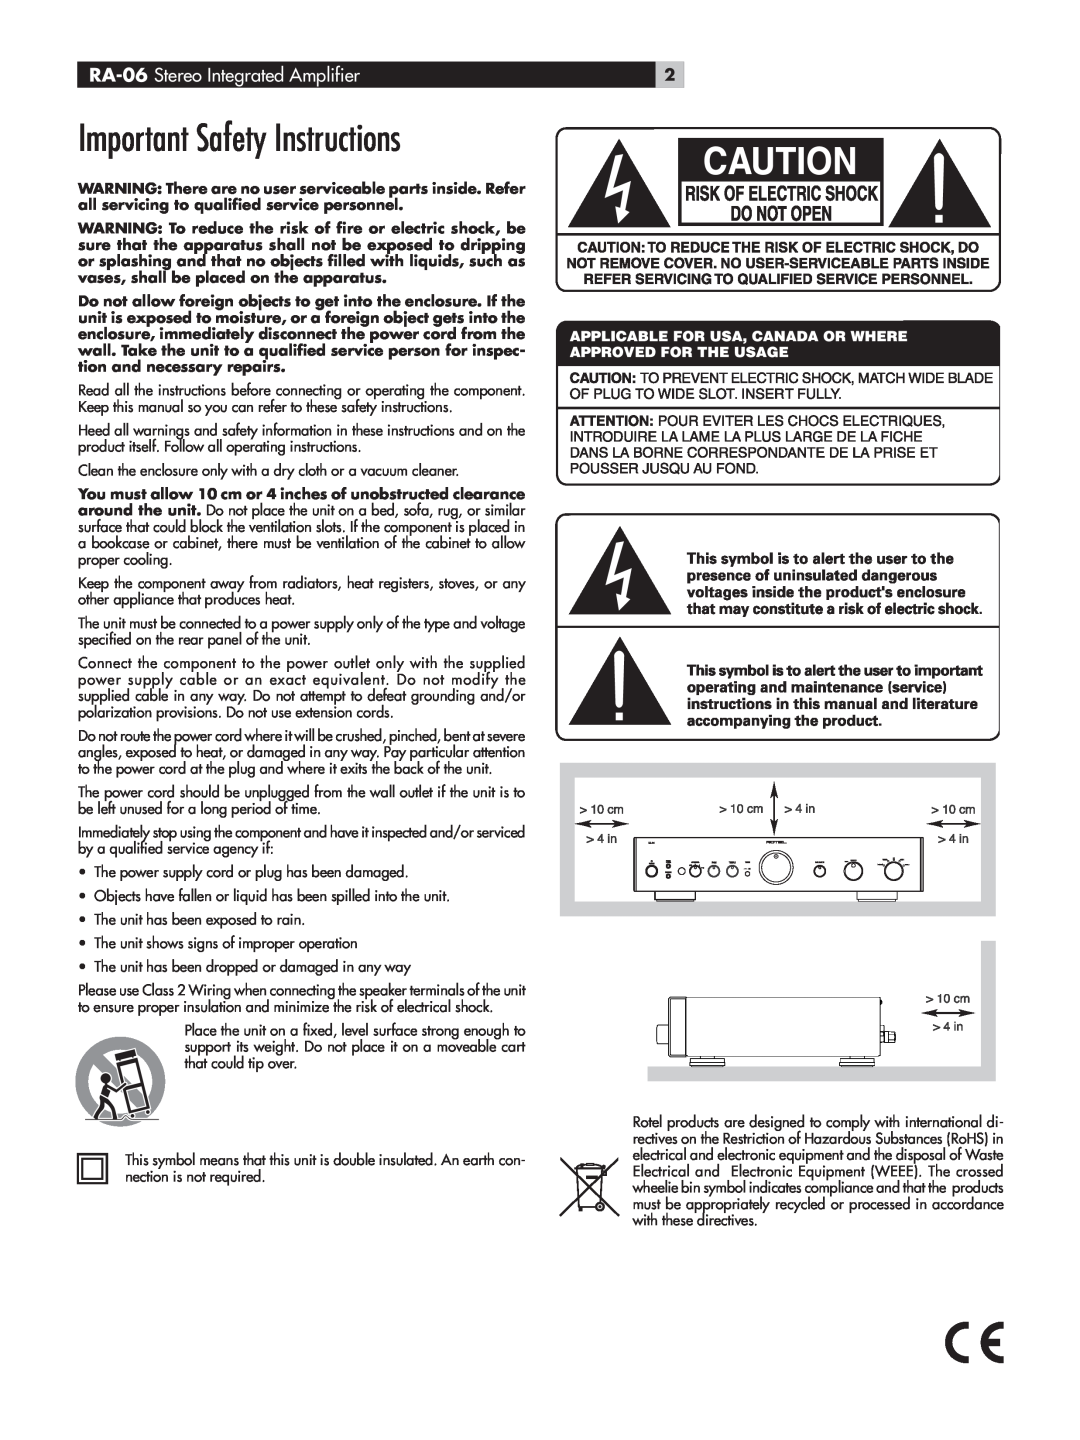 Rotel owner manual Important Safety Instructions, RA-06 Stereo Integrated Amplifier 